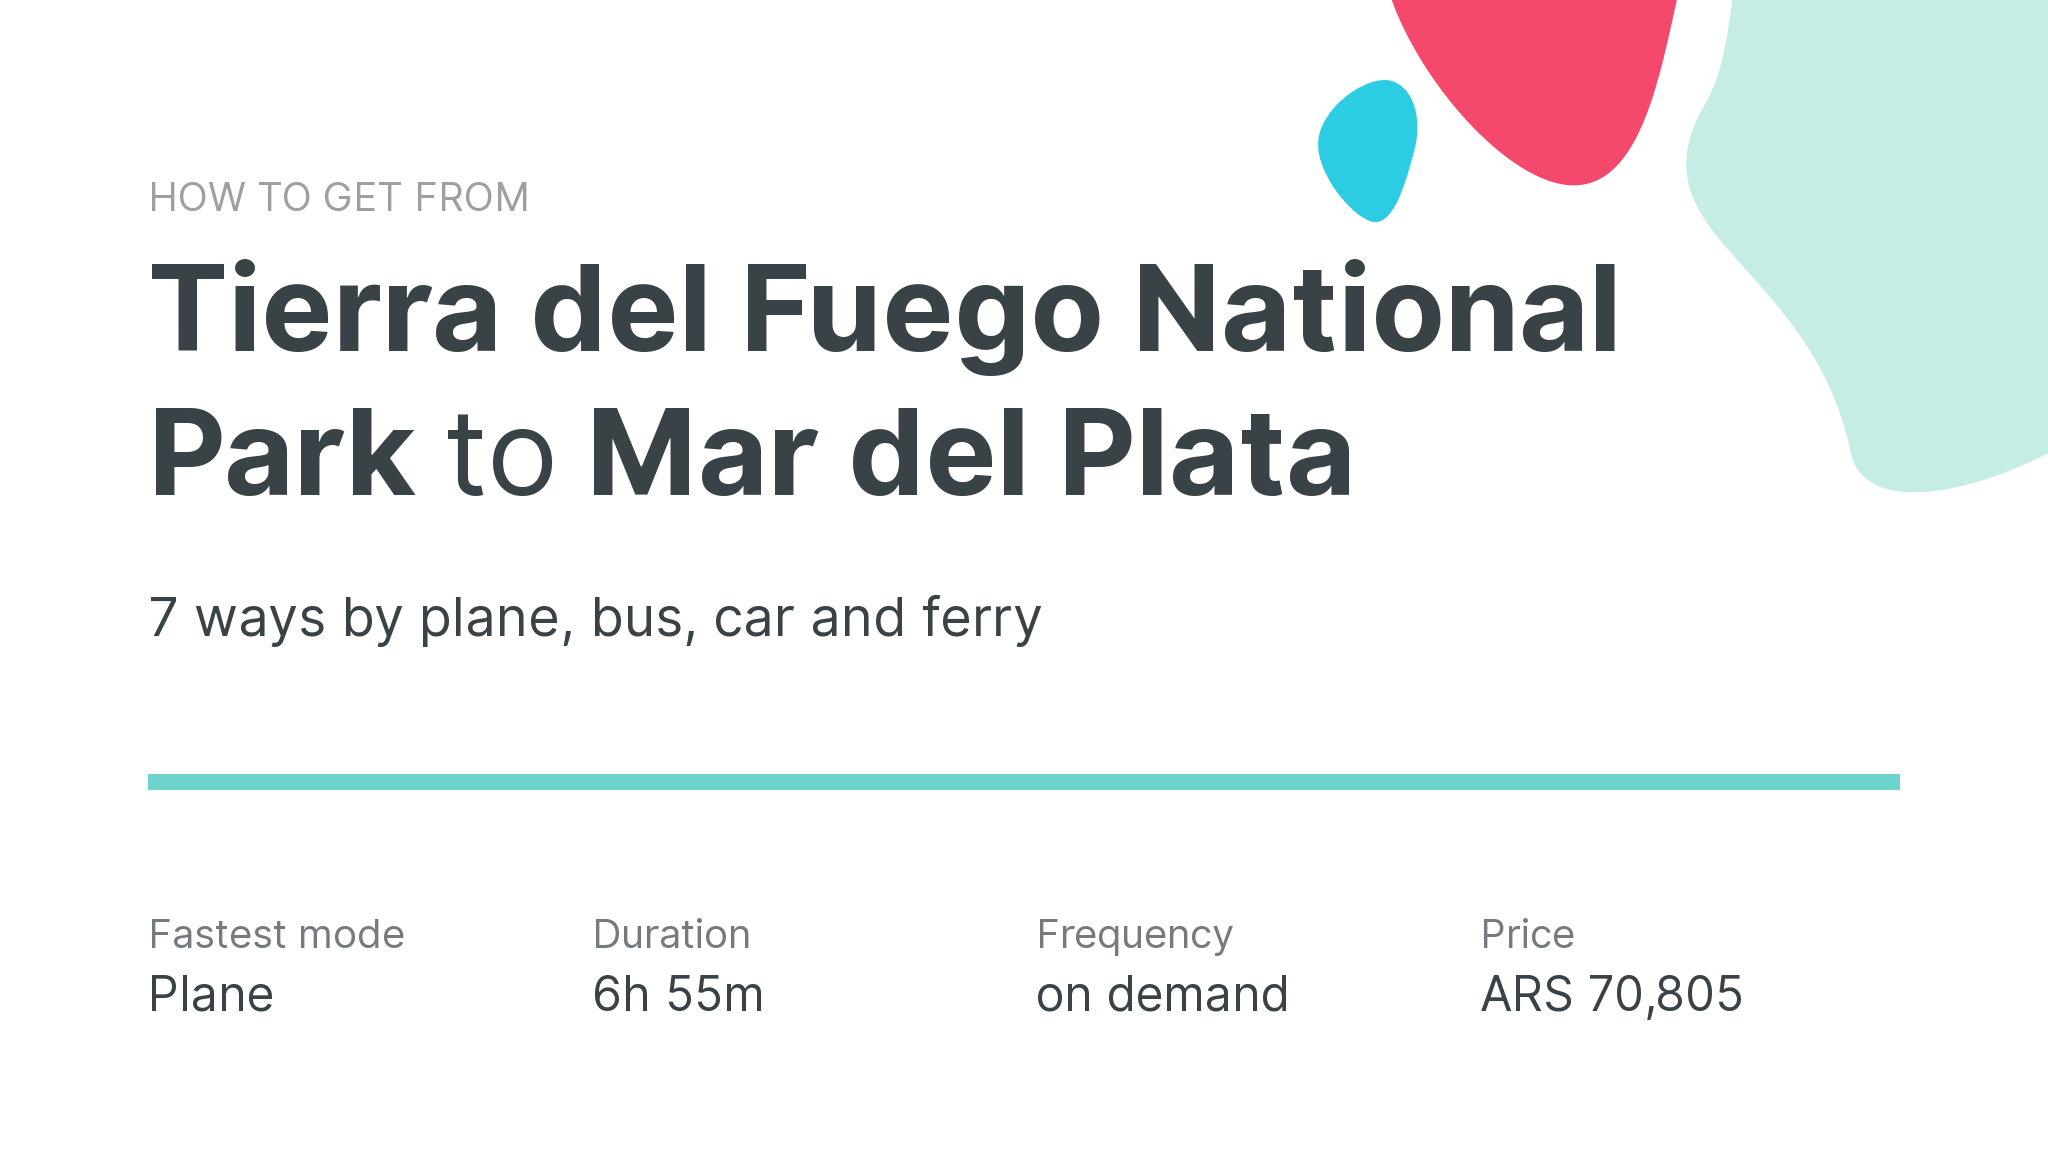 How do I get from Tierra del Fuego National Park to Mar del Plata